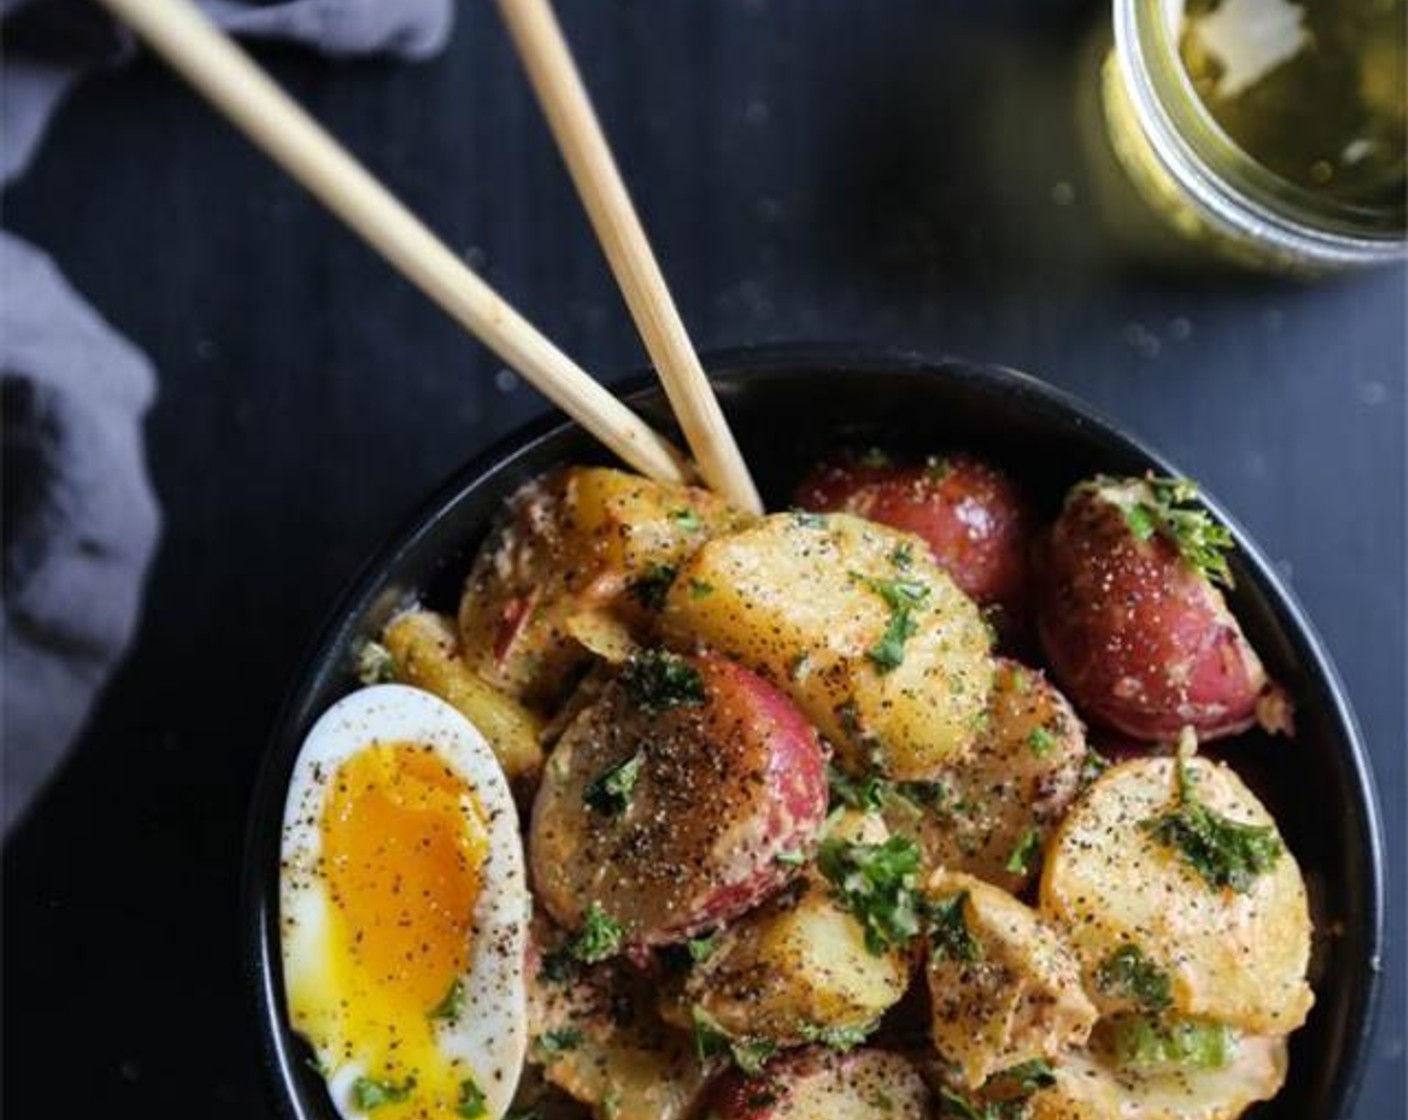 Asian Potato Salad with Seven Minute Egg